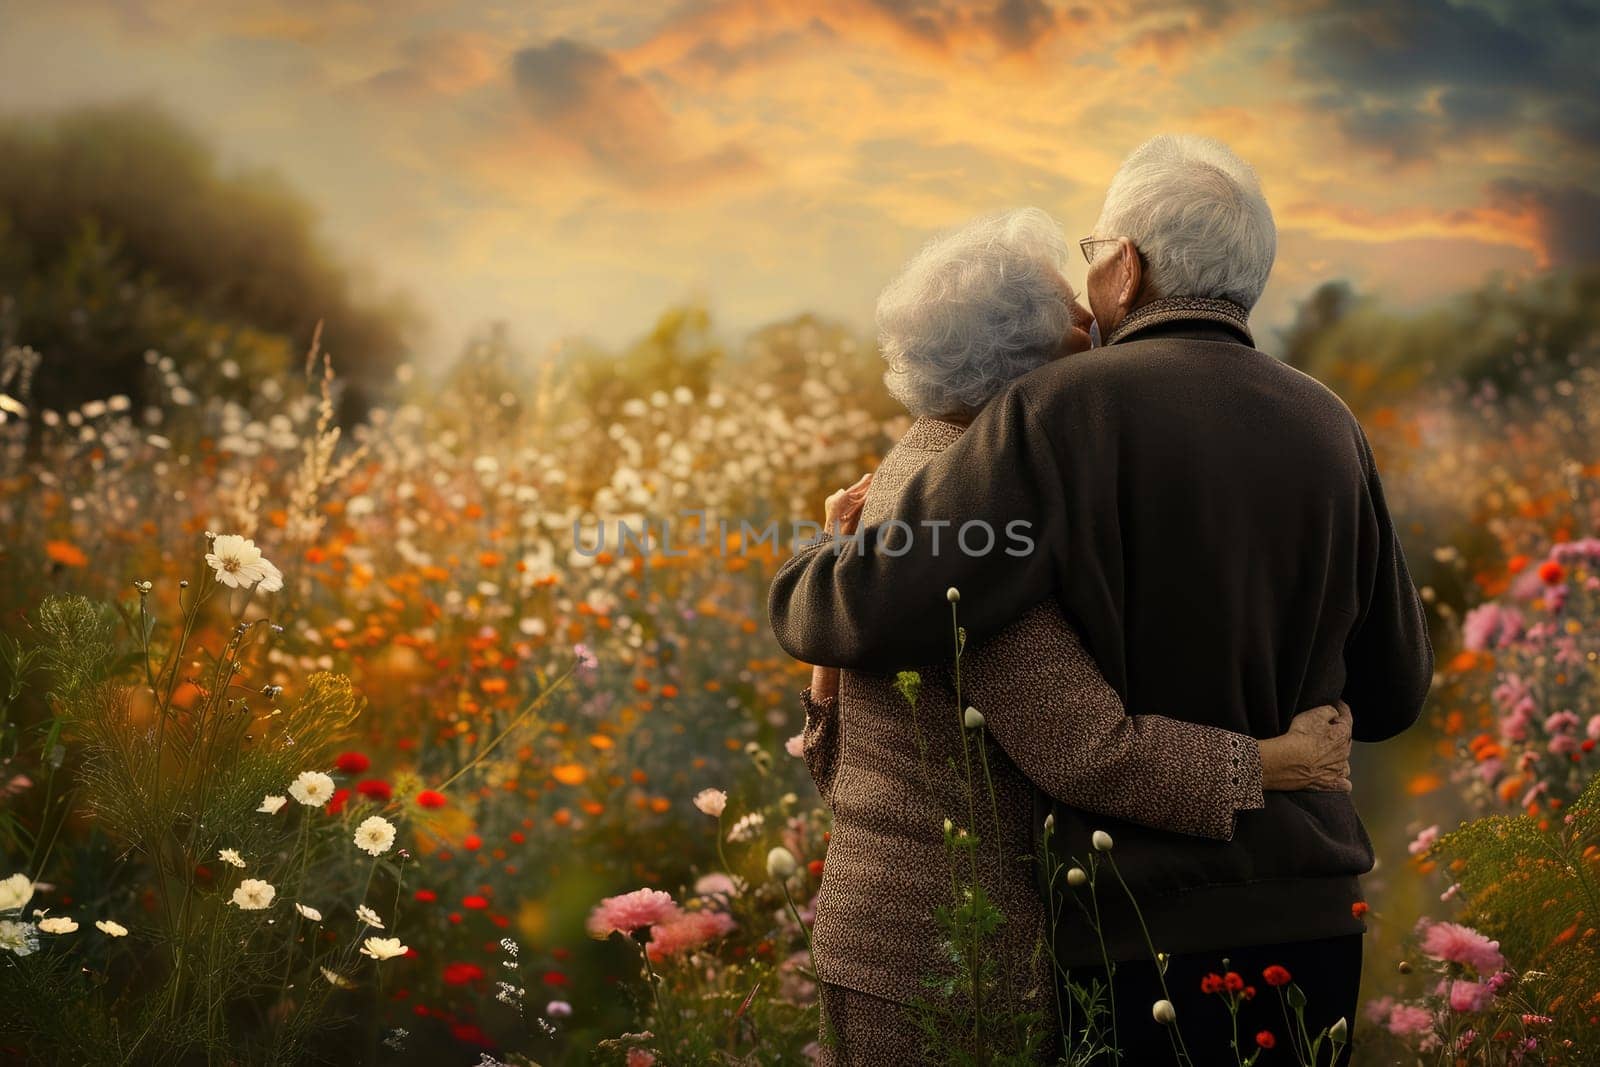 beautiful romance of lovers on valentines day in nature outdoors embracing with affection pragma